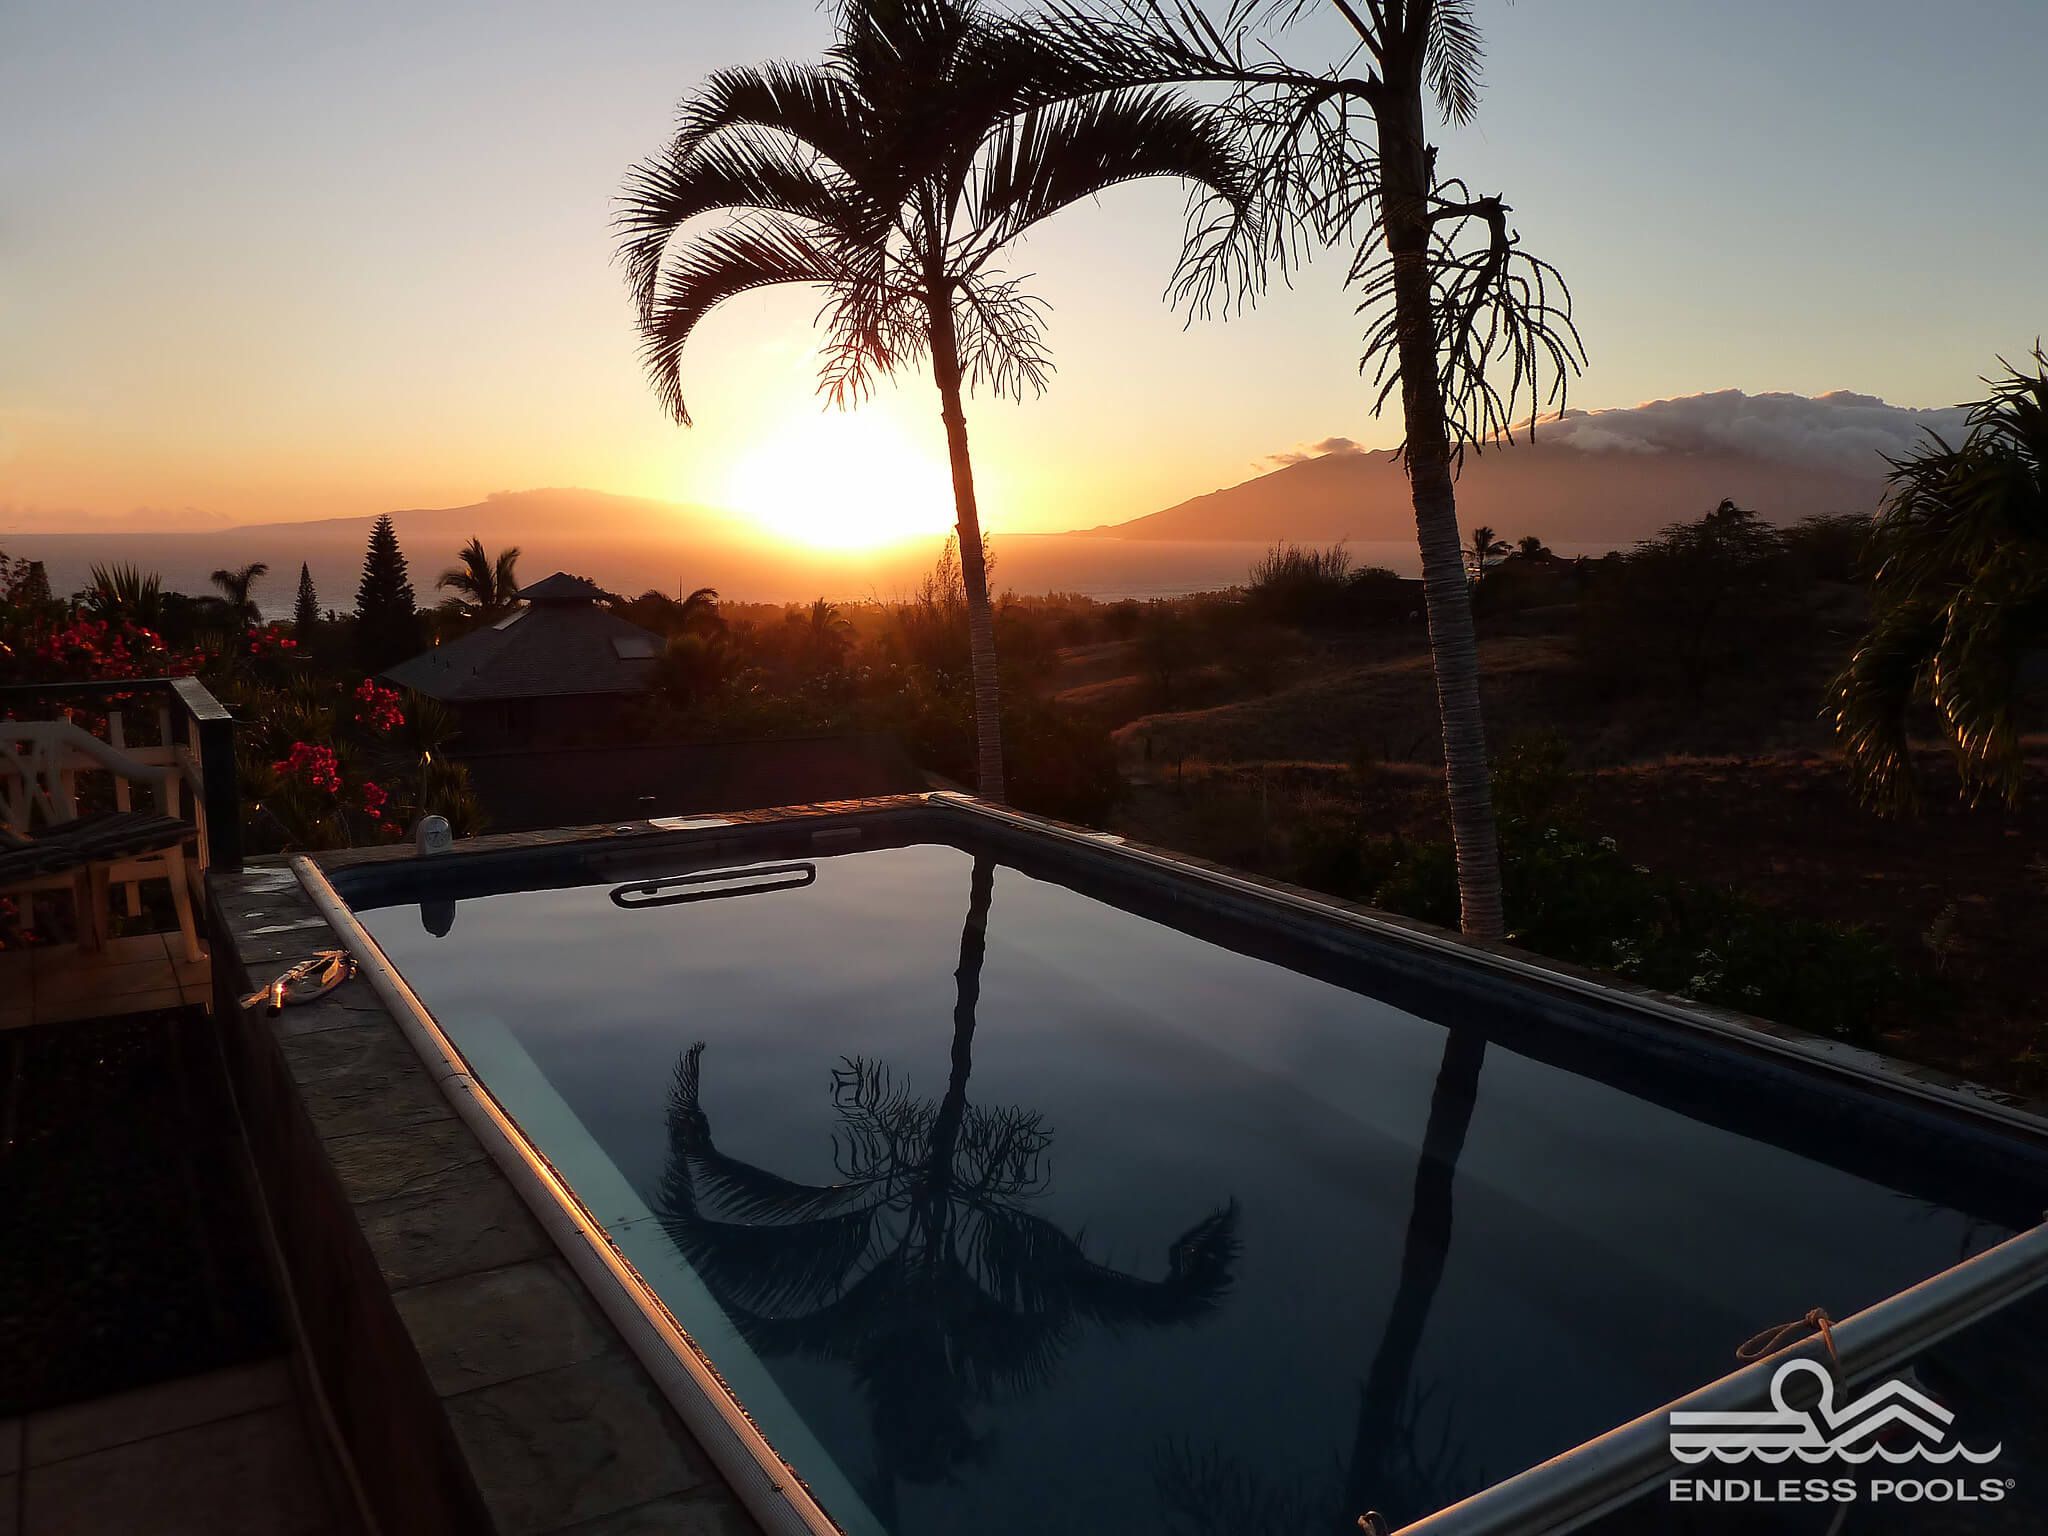 picture of Original Endless Pool at sunset in Hawaii